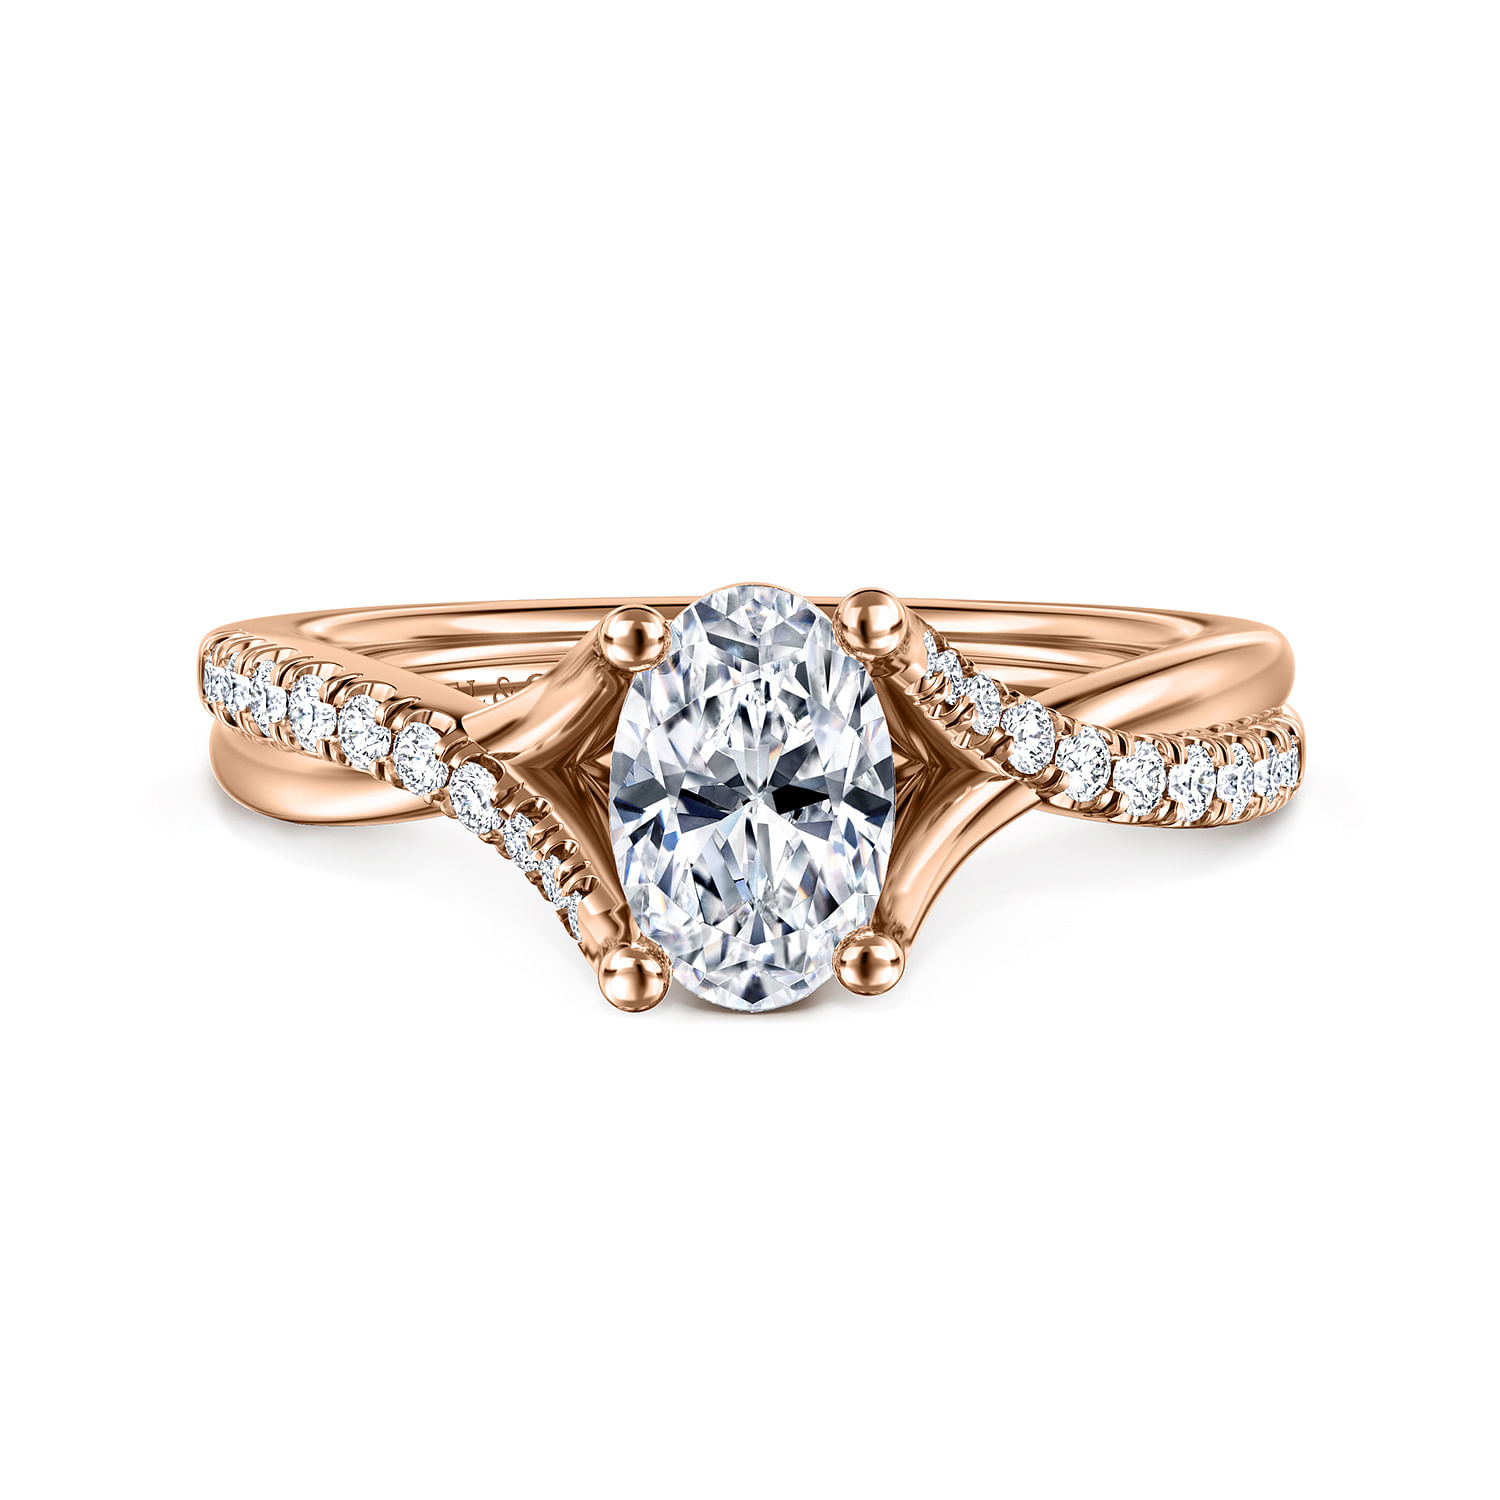 Leigh - 14K Rose Gold Oval Diamond Engagement Ring